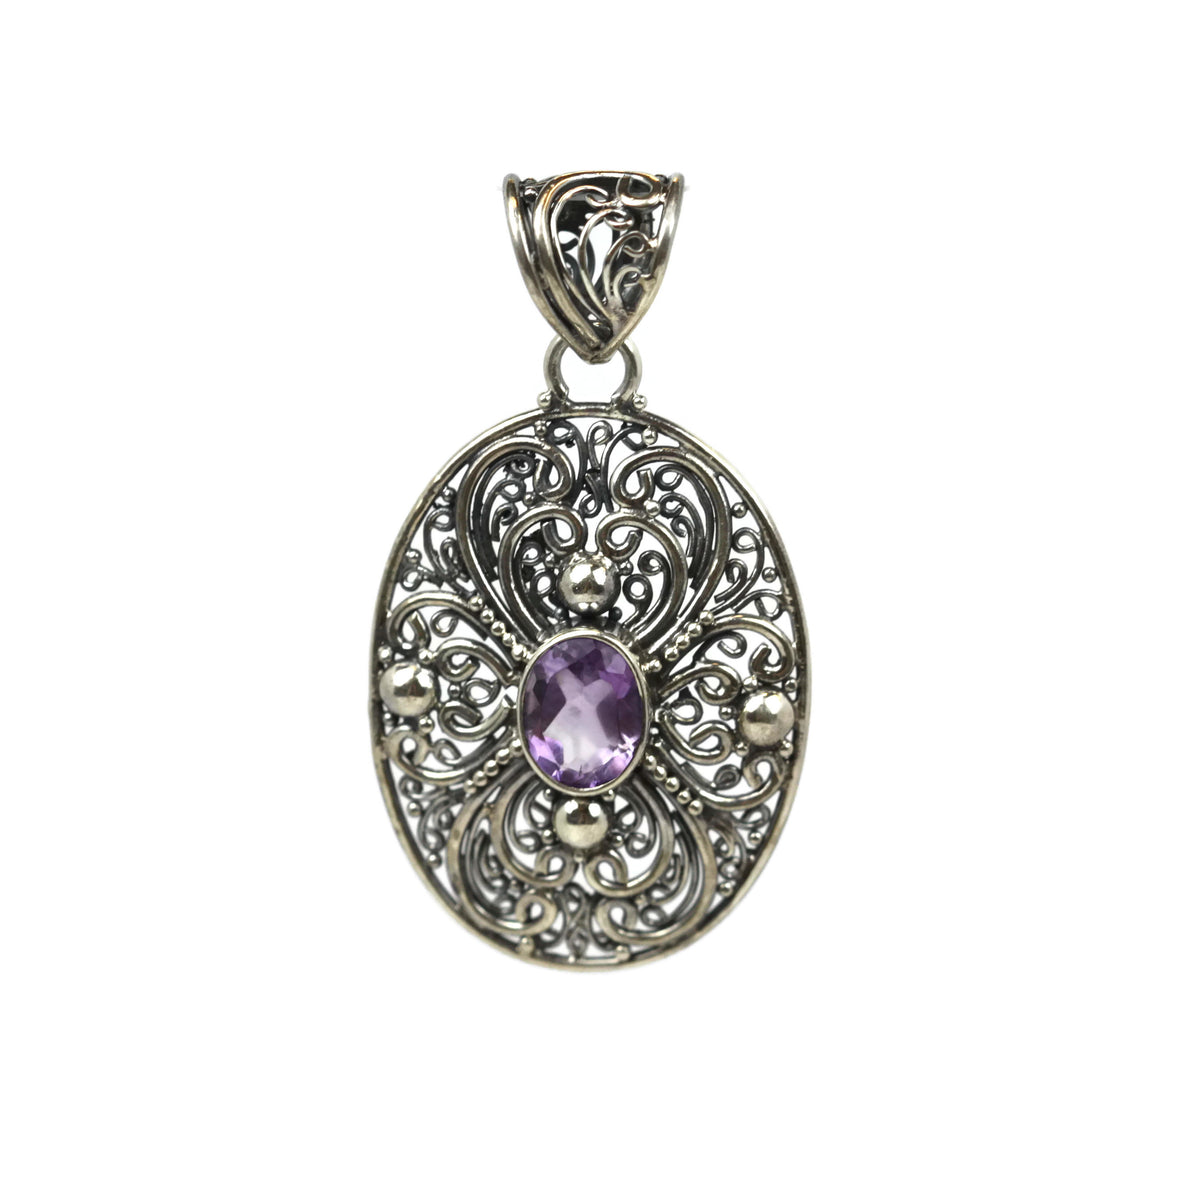 Handmade 925 Sterling Silver Antique Decorative Pendant With Oval Faceted Amethyst Gemstone